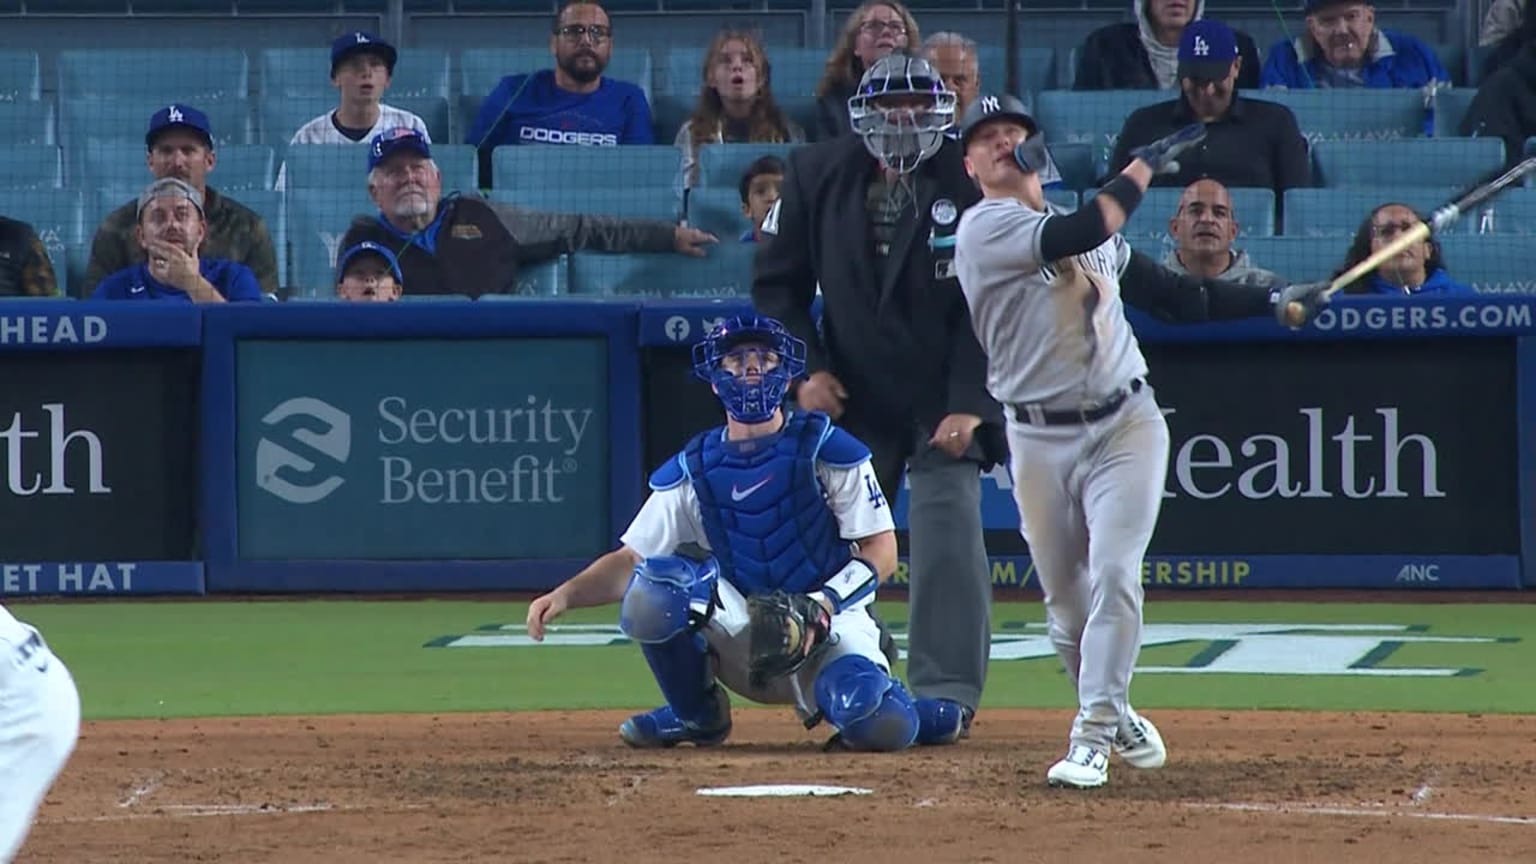 Josh Donaldson exits after getting hit in hand by fastball